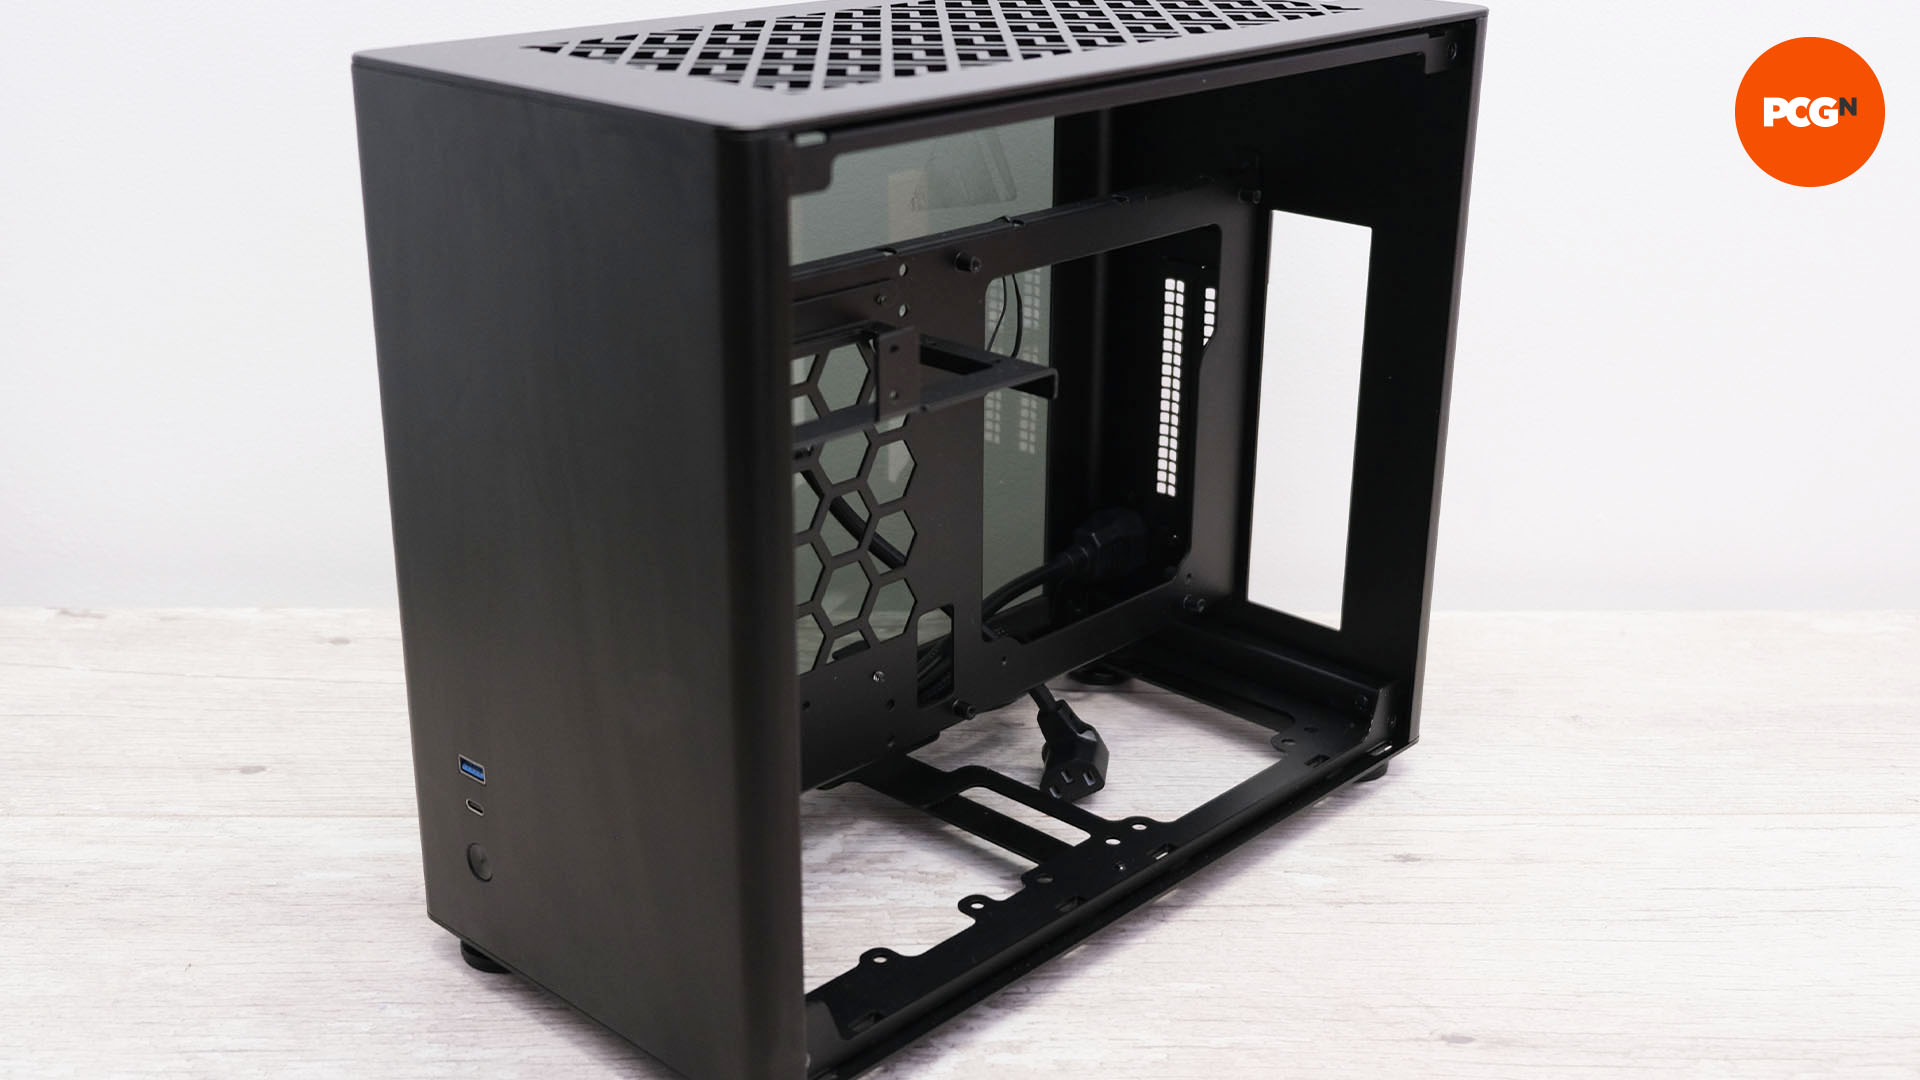 How to paint your PC case: Choose interior or exterior